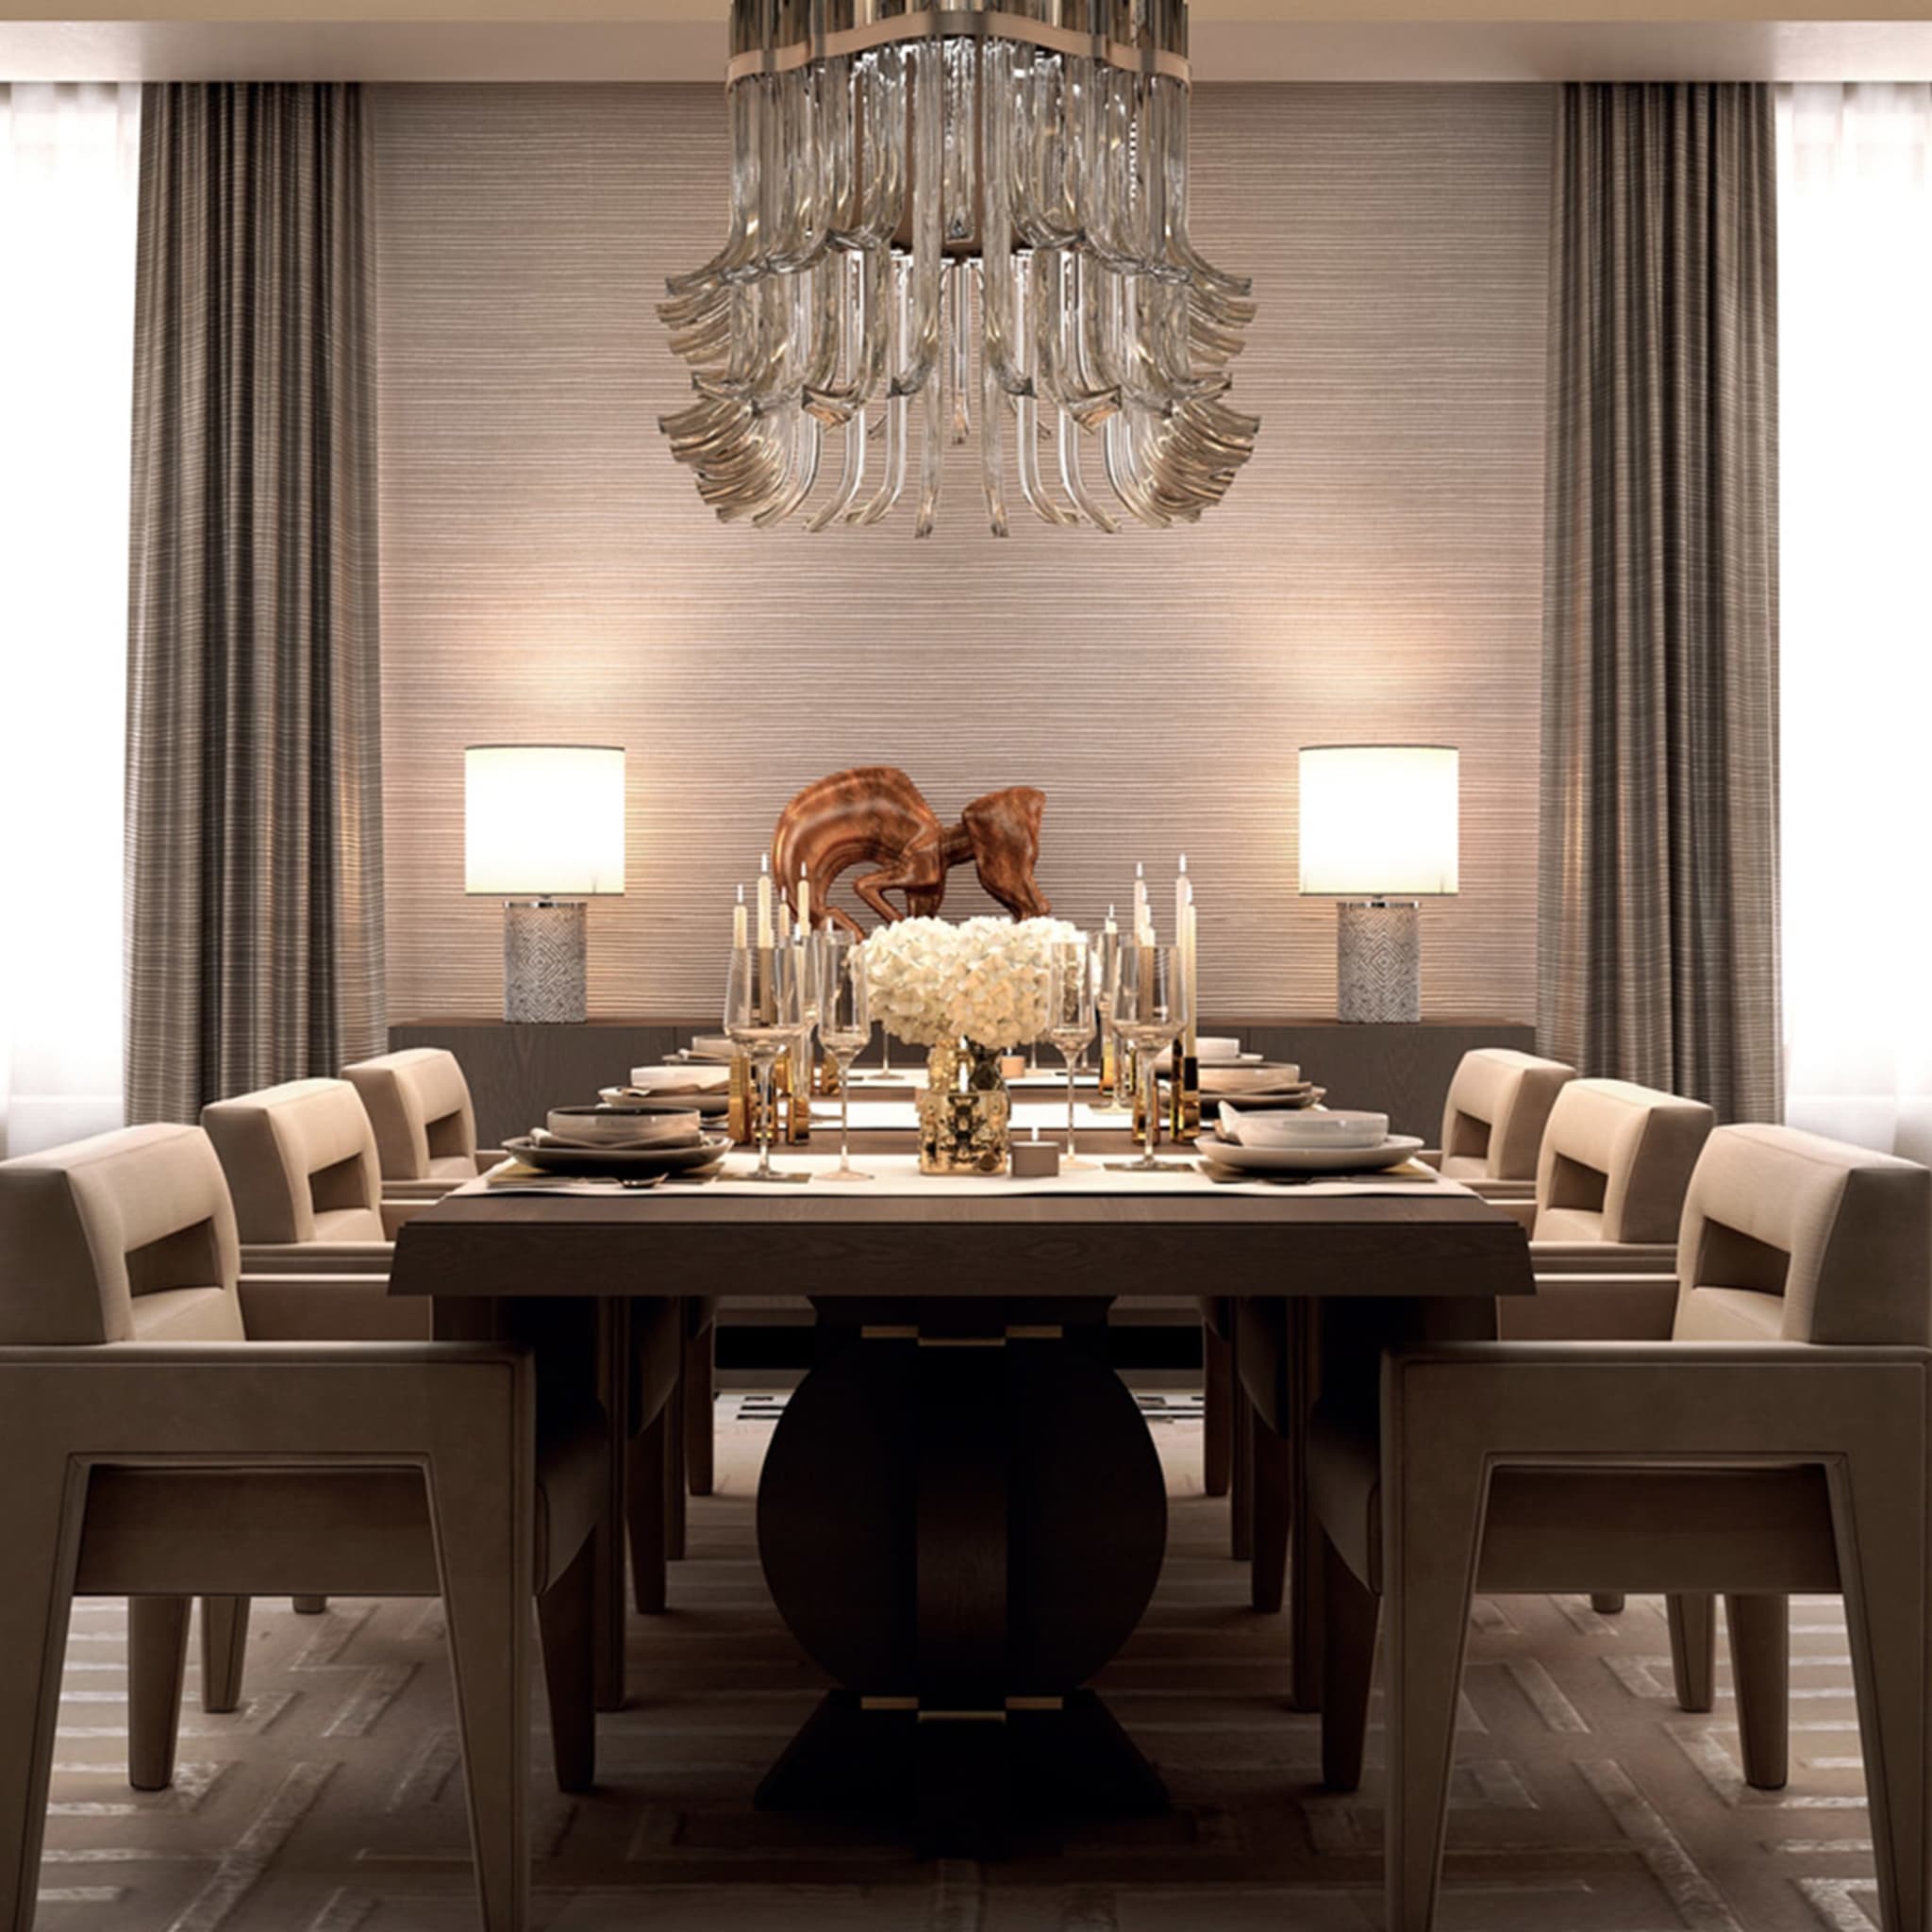 Gramercy Dining Table by Giannella Ventura - Alternative view 2